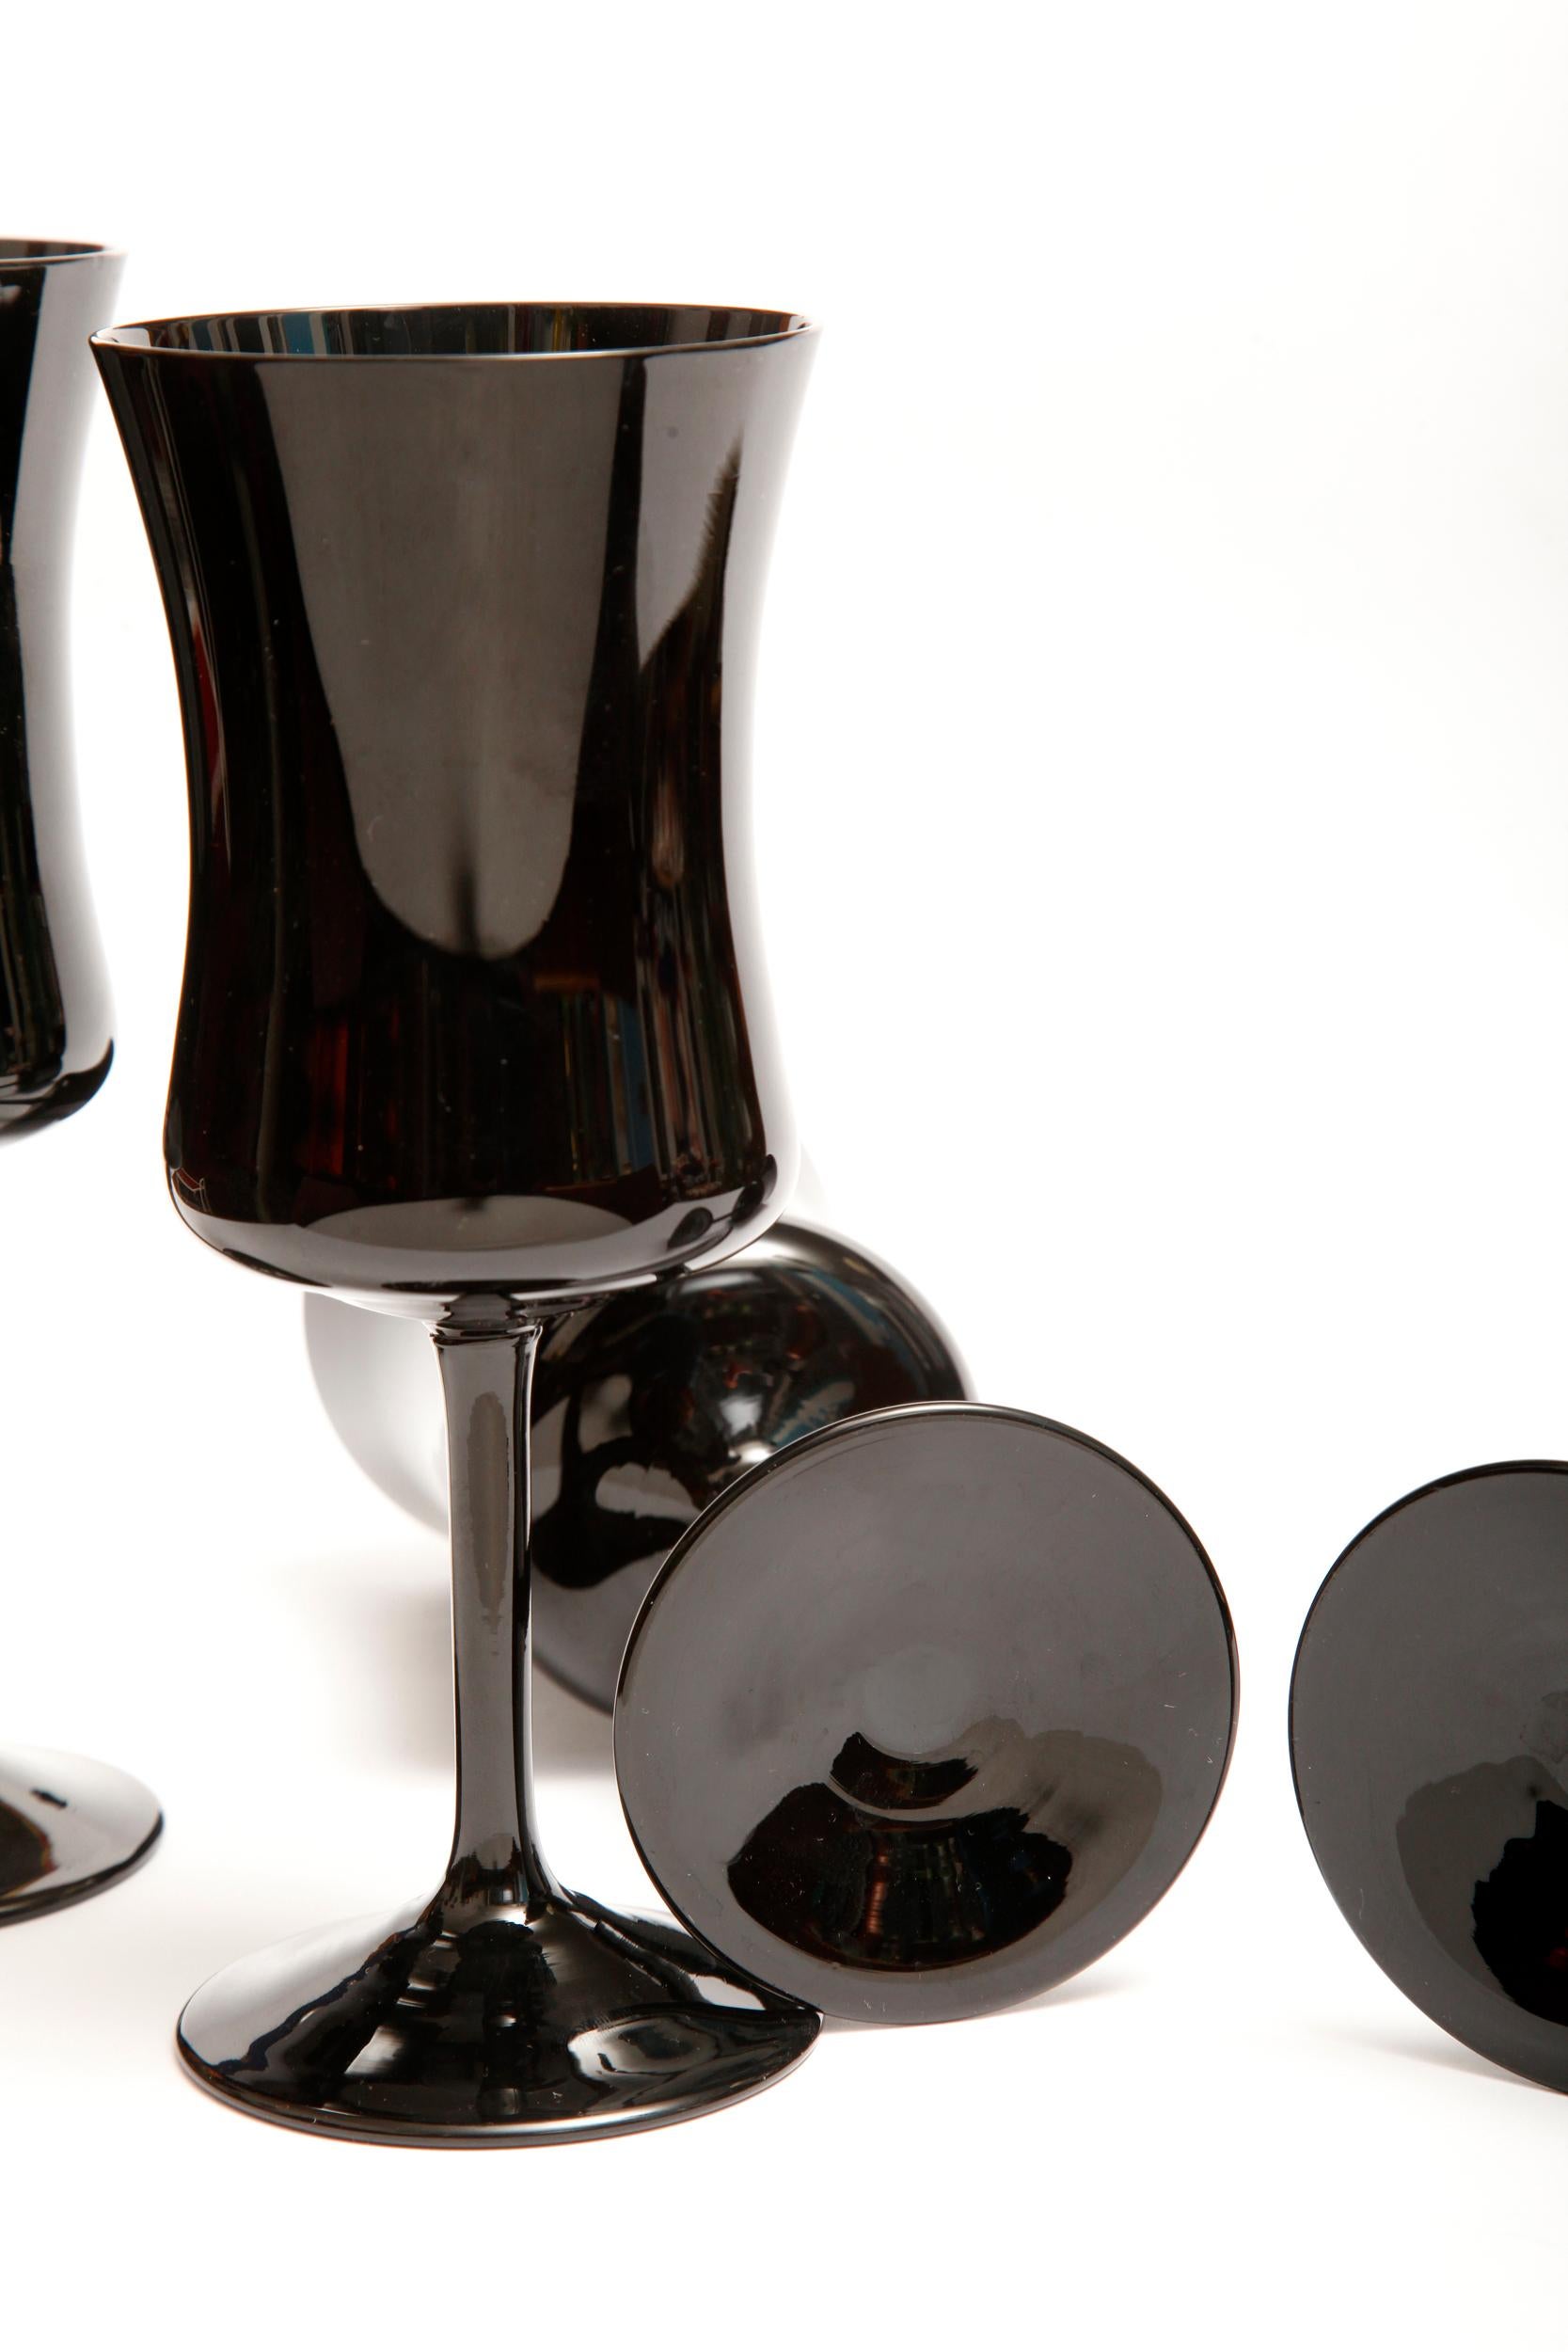 Four Black Elegant Glasses by Zbigniew Horbowy, Poland, 1970s For Sale 2